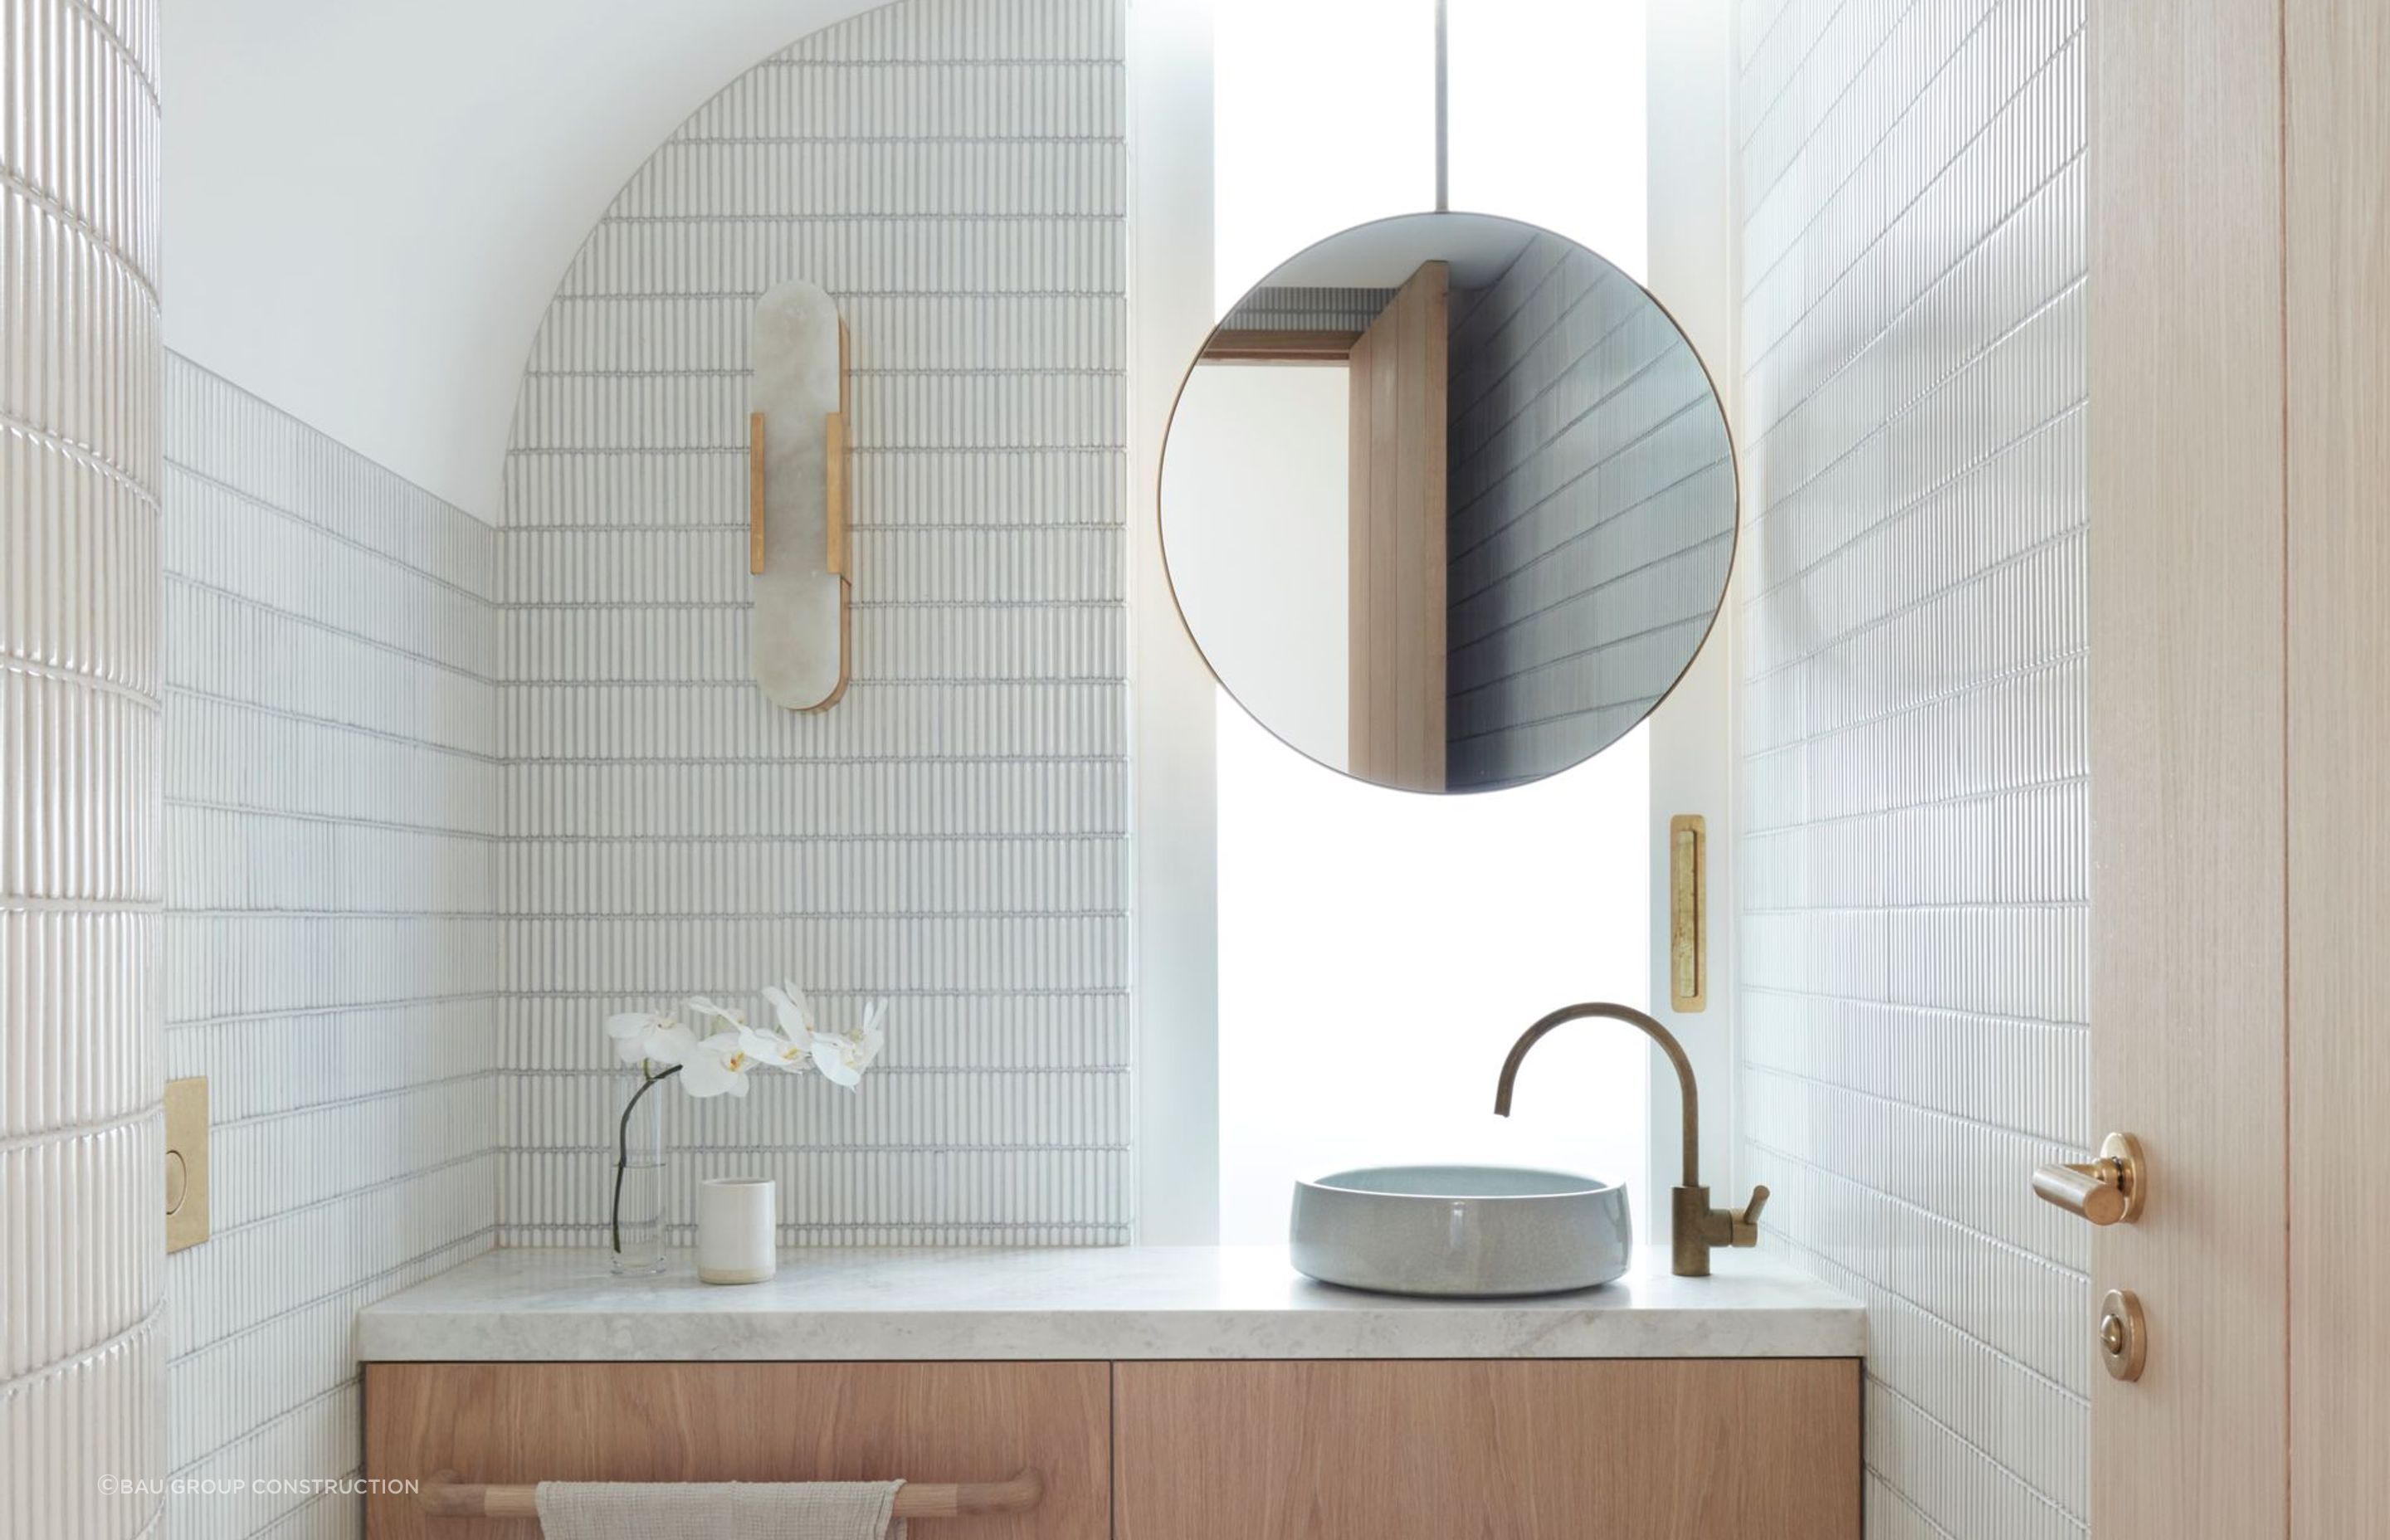 Neutral tones and natural materials can be found in many coastal bathrooms.